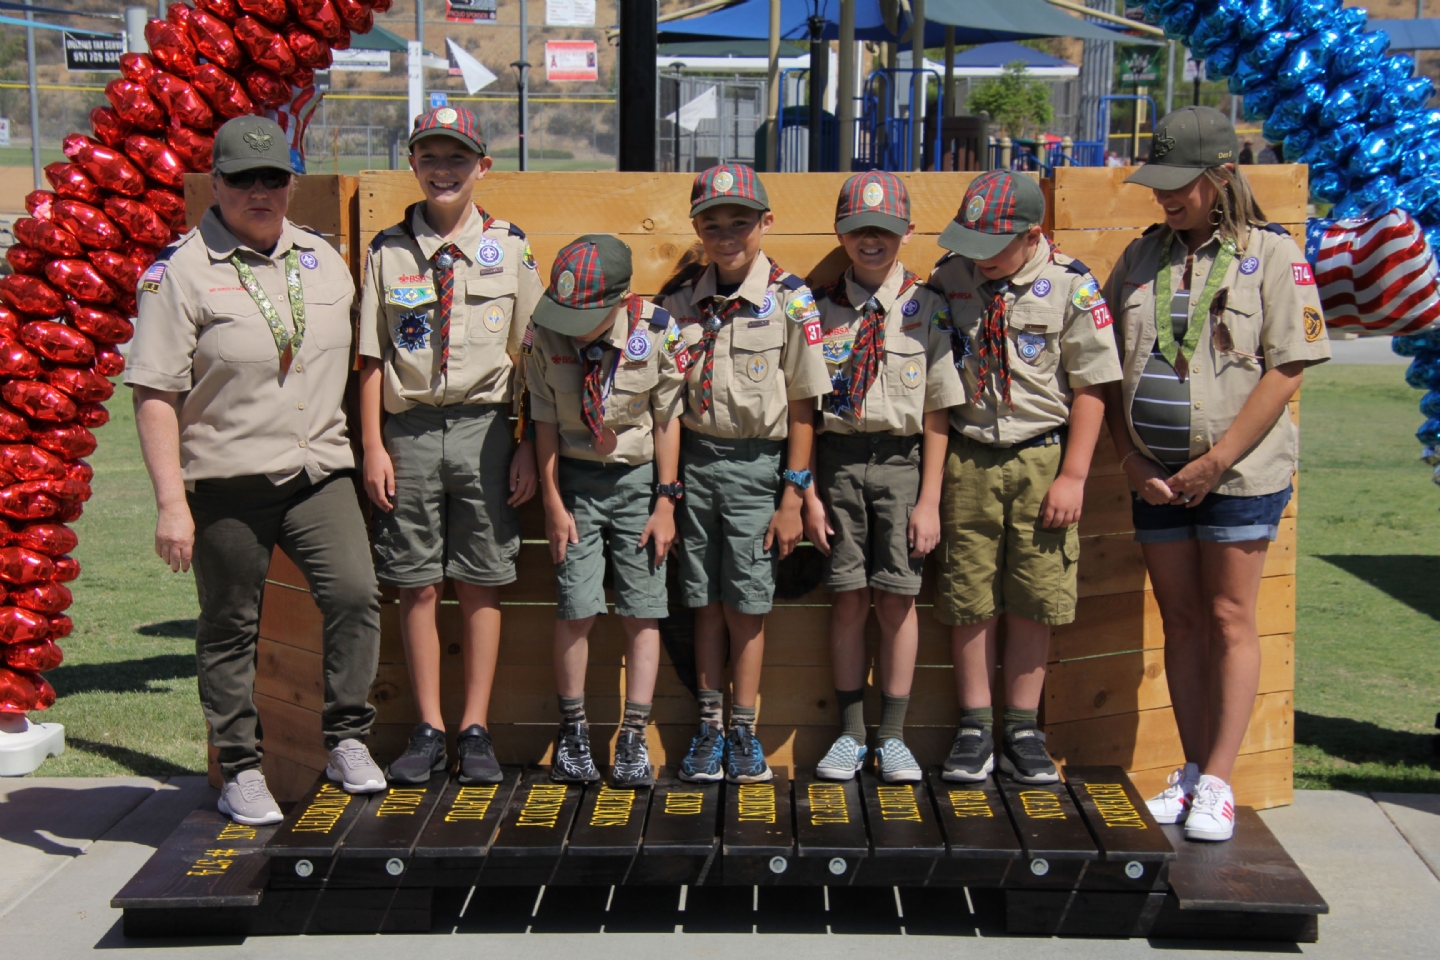 The crossover bridge that the graduating AOLs Scouts can walk across from the left side to the right side is situated up front. The Cubmaster and Assistant Cubmaster stand on the left side of the bridge. The troop representatives are called up and stand on the right side of the bridge.